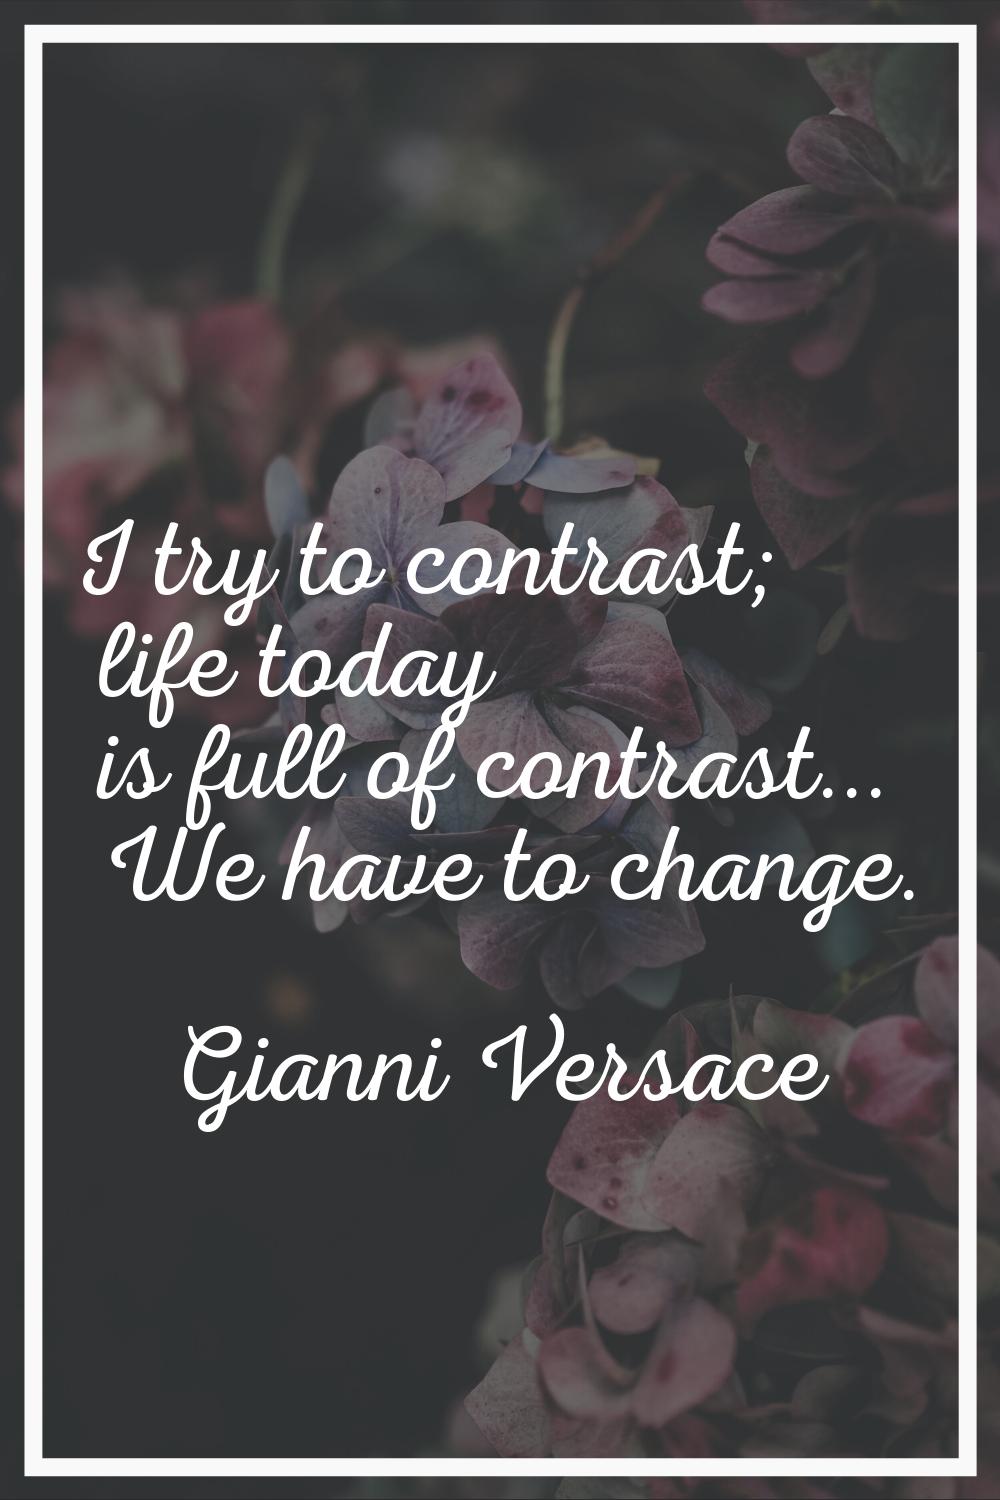 I try to contrast; life today is full of contrast... We have to change.